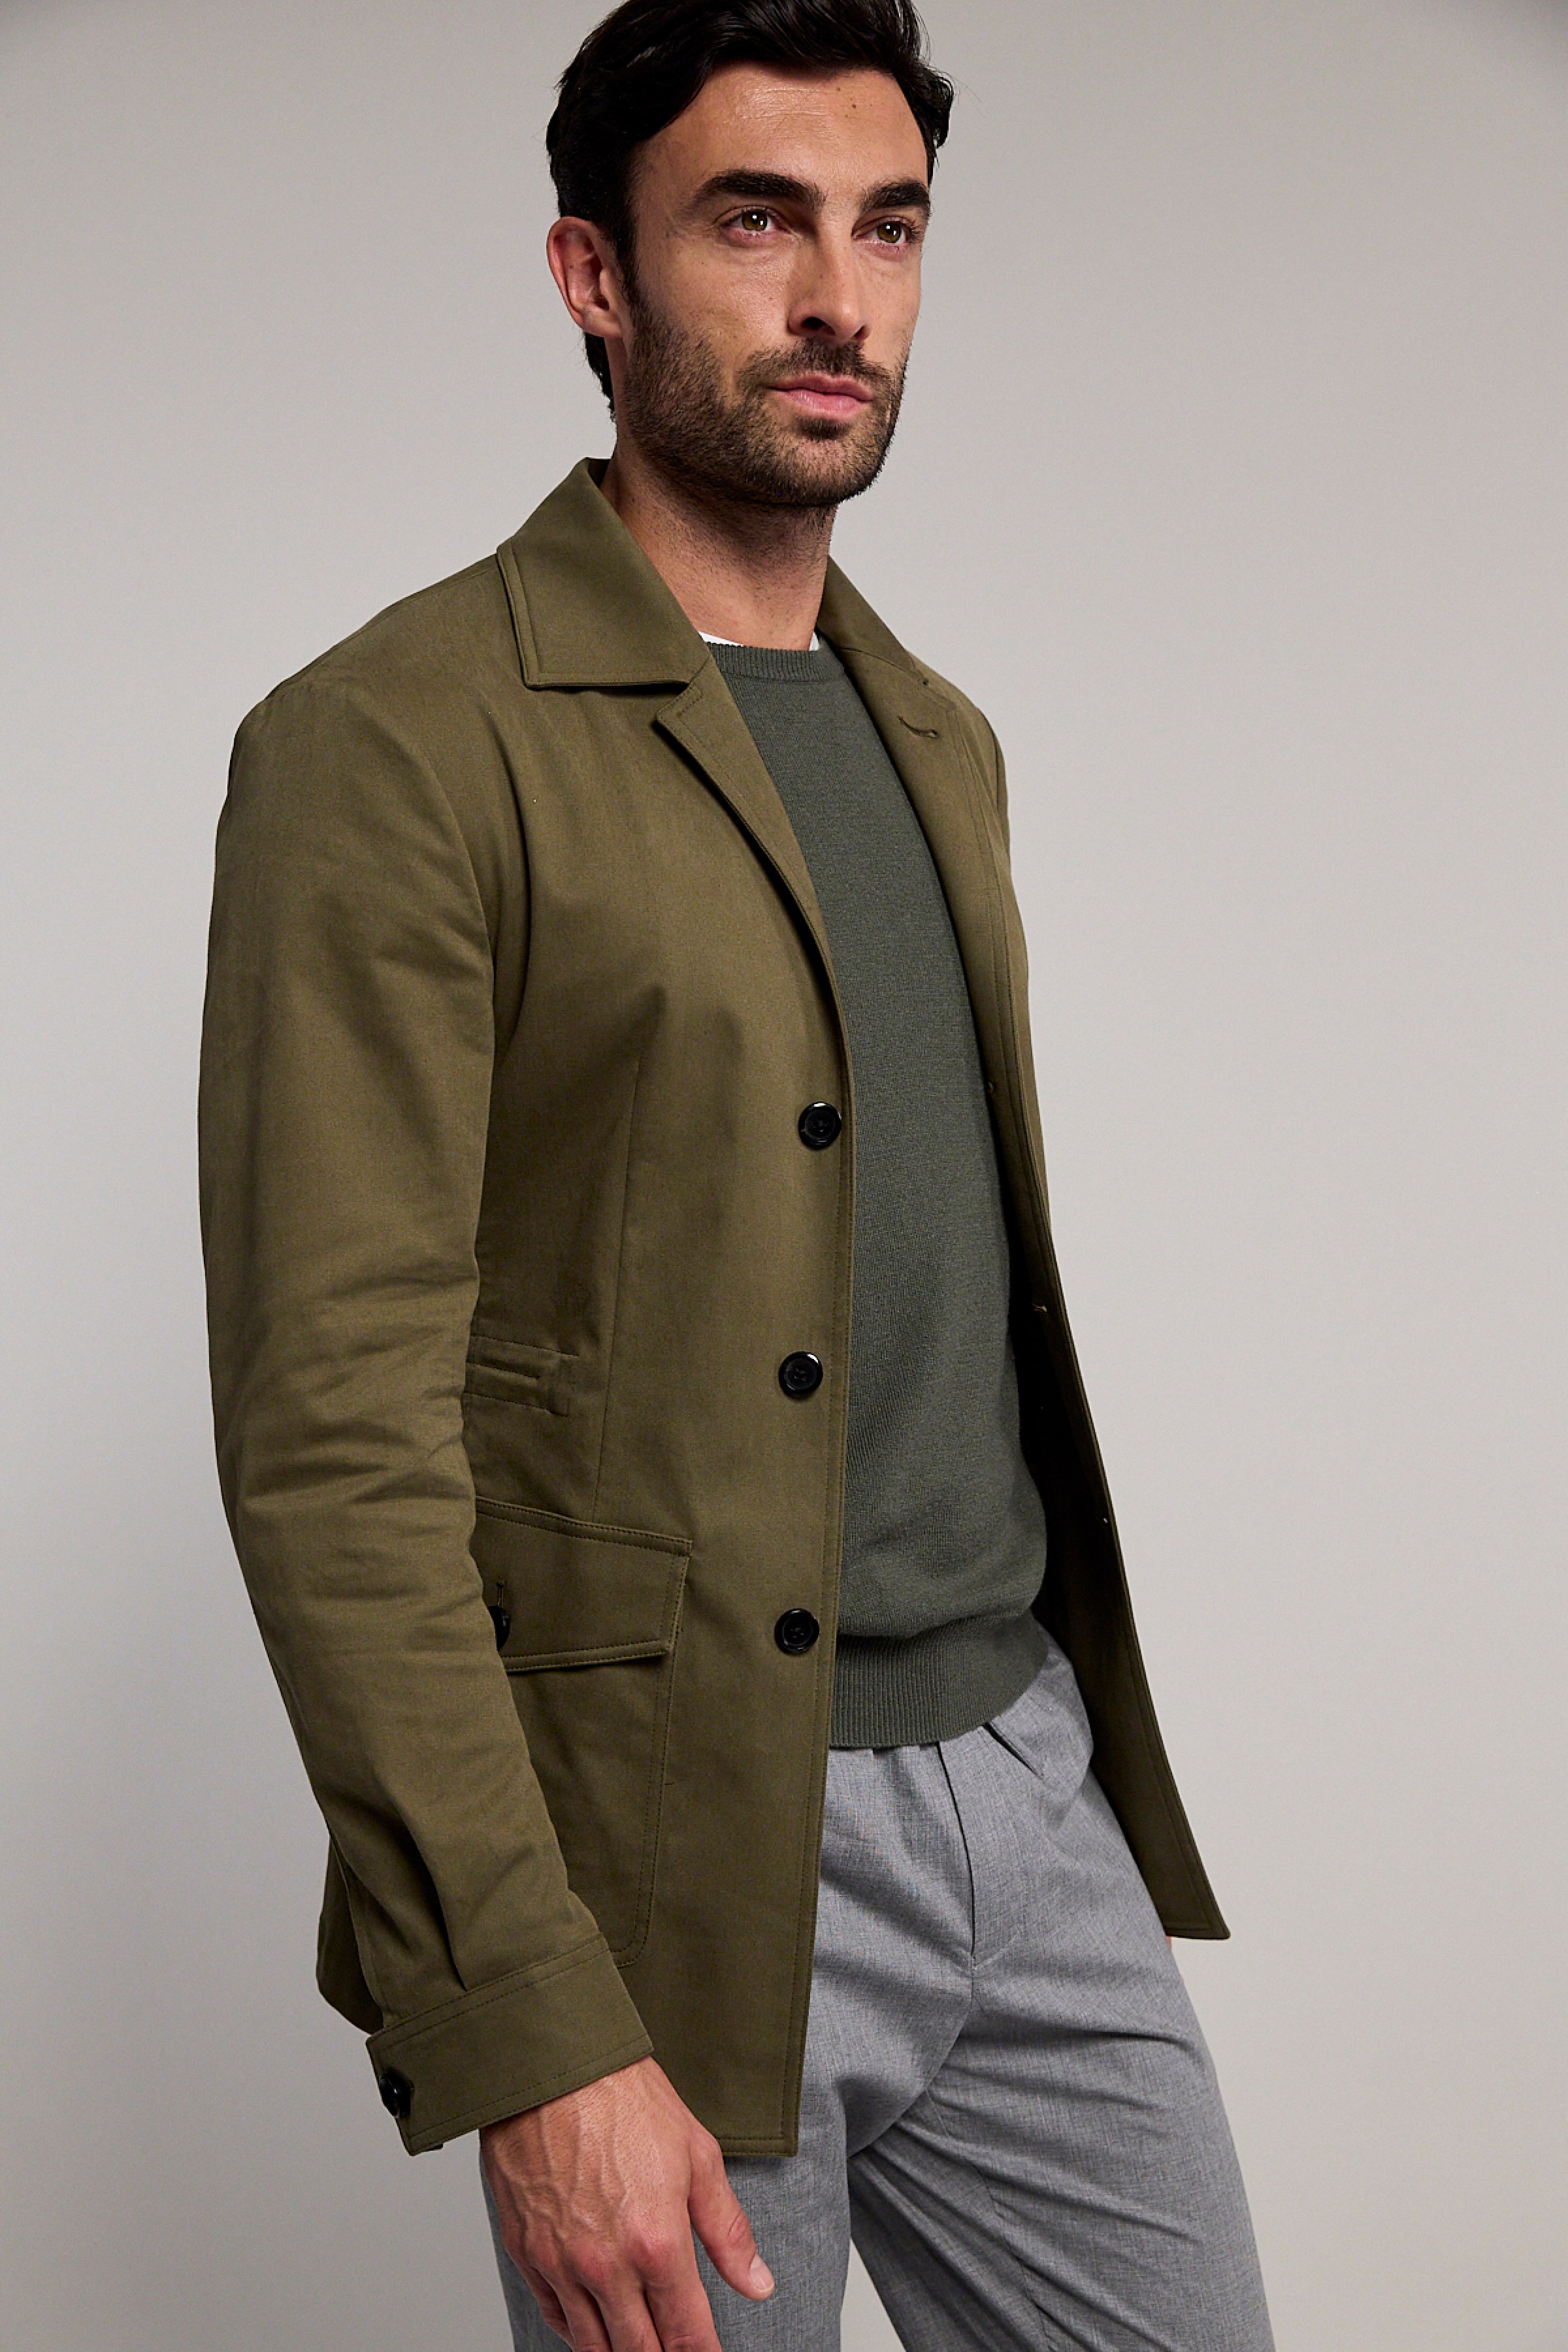 Hesworth Olive Green Field Jacket by Knot Standard